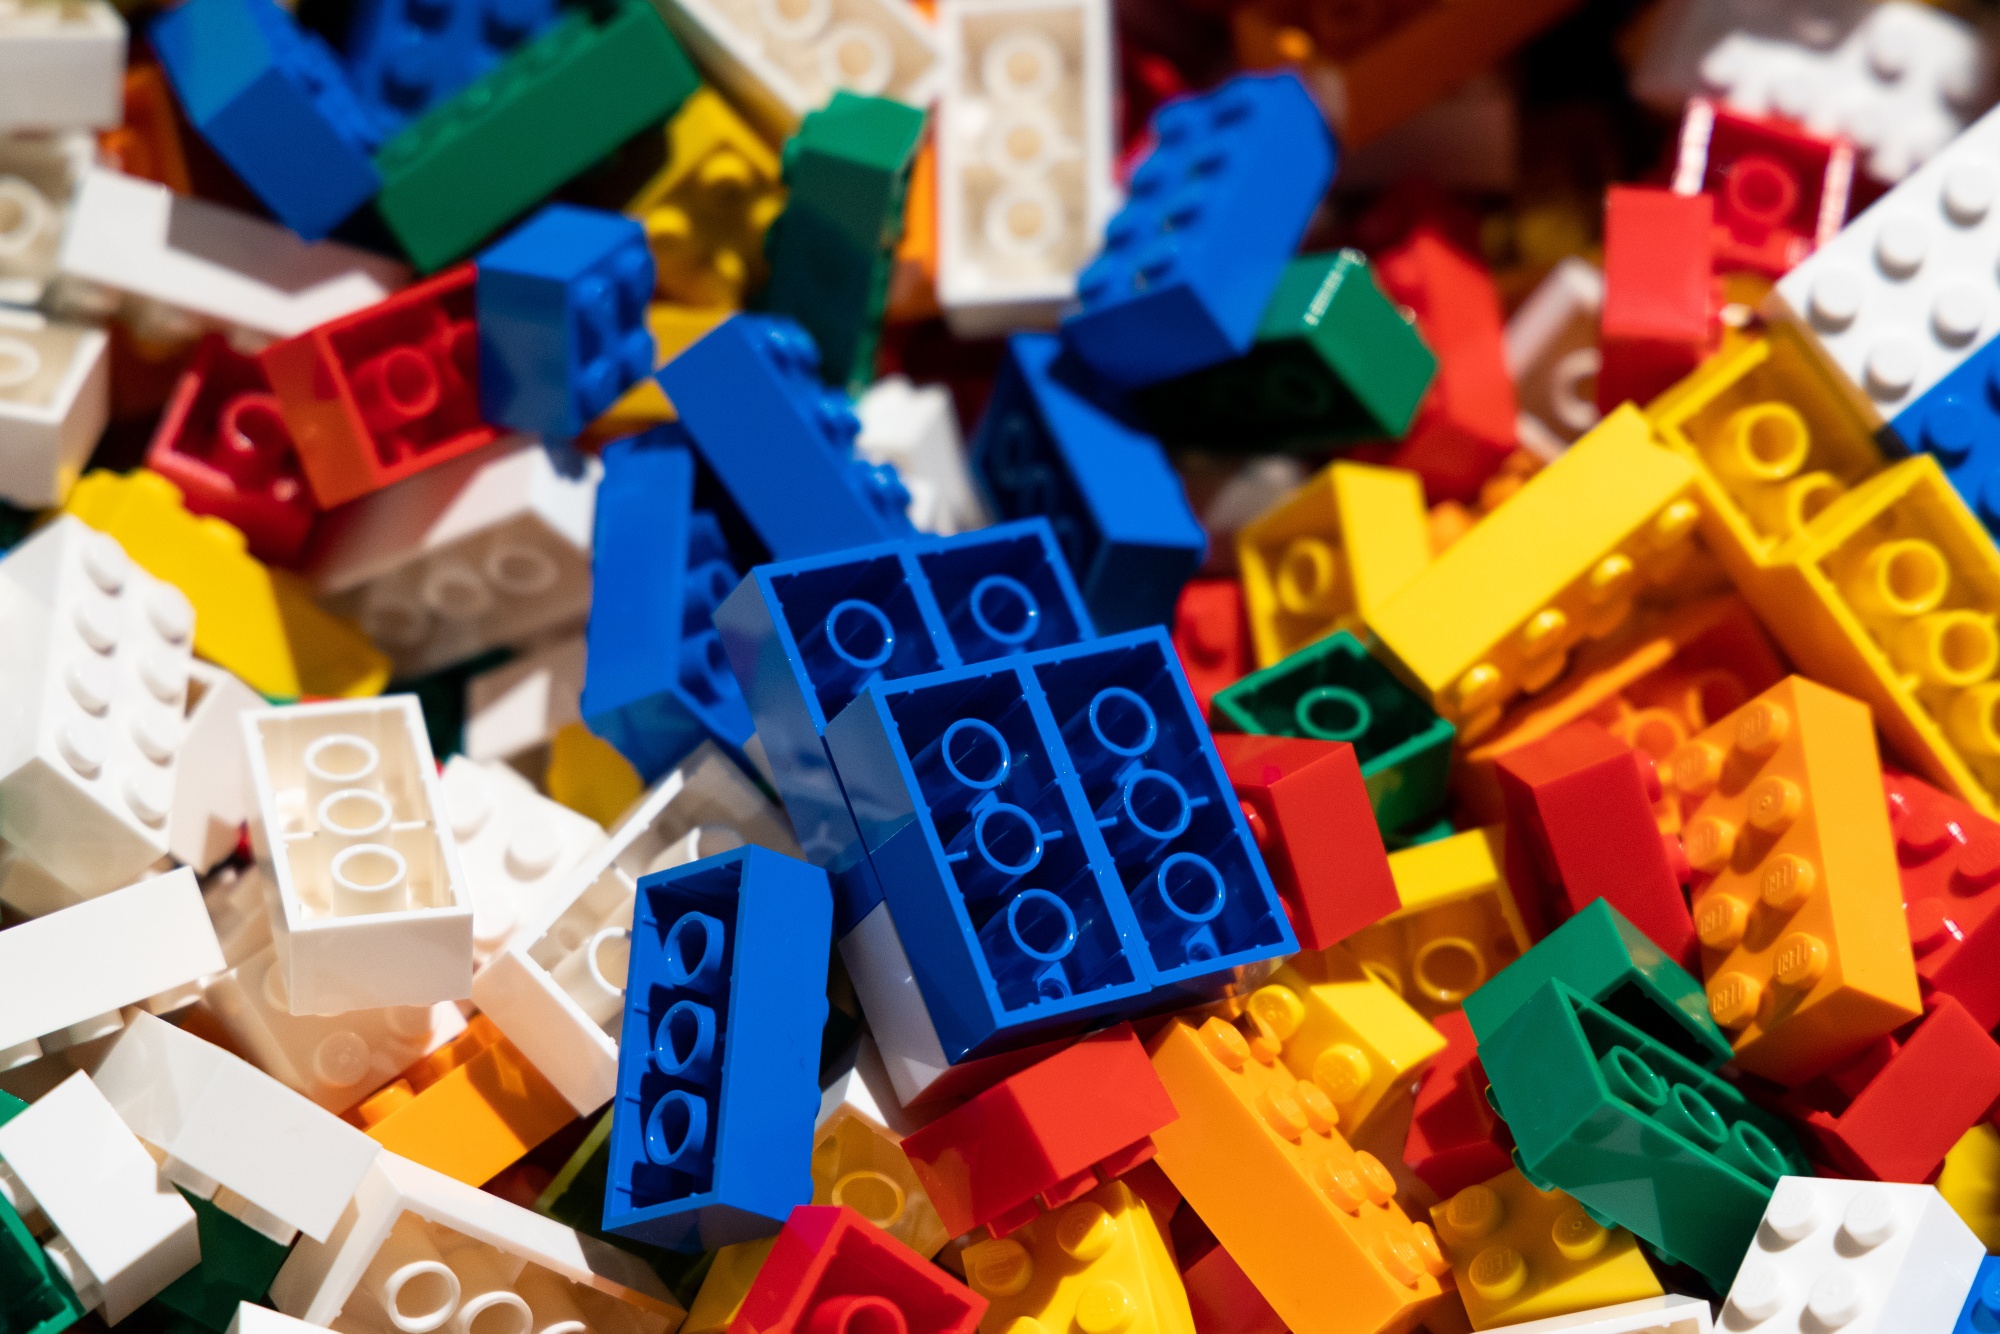 Lego Posts Small Gain as Toymaker Invests in Growth - Bloomberg